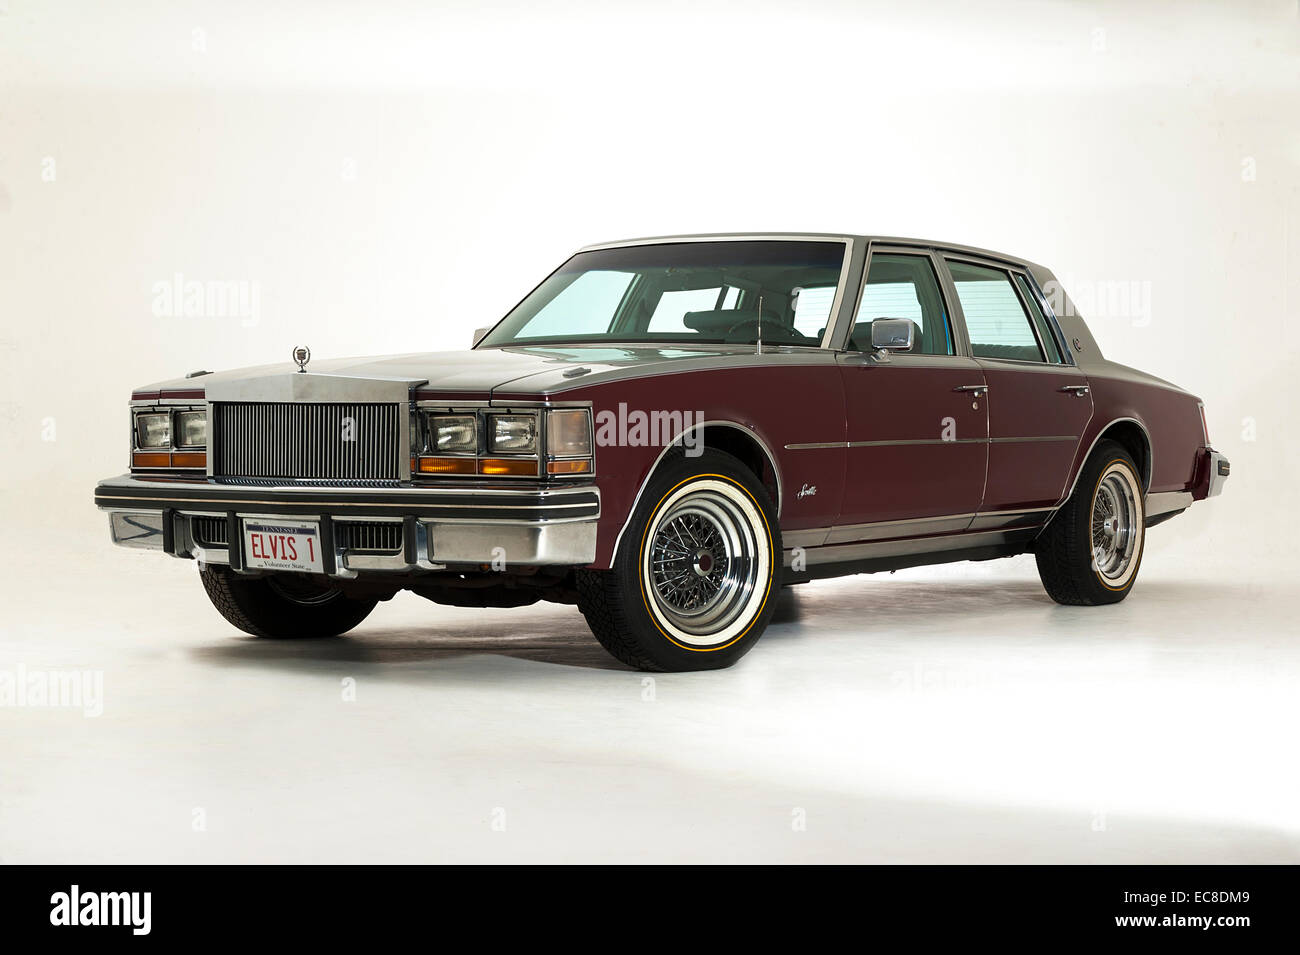 1976 Cadillac Seville owned by Elvis Presley Stock Photo